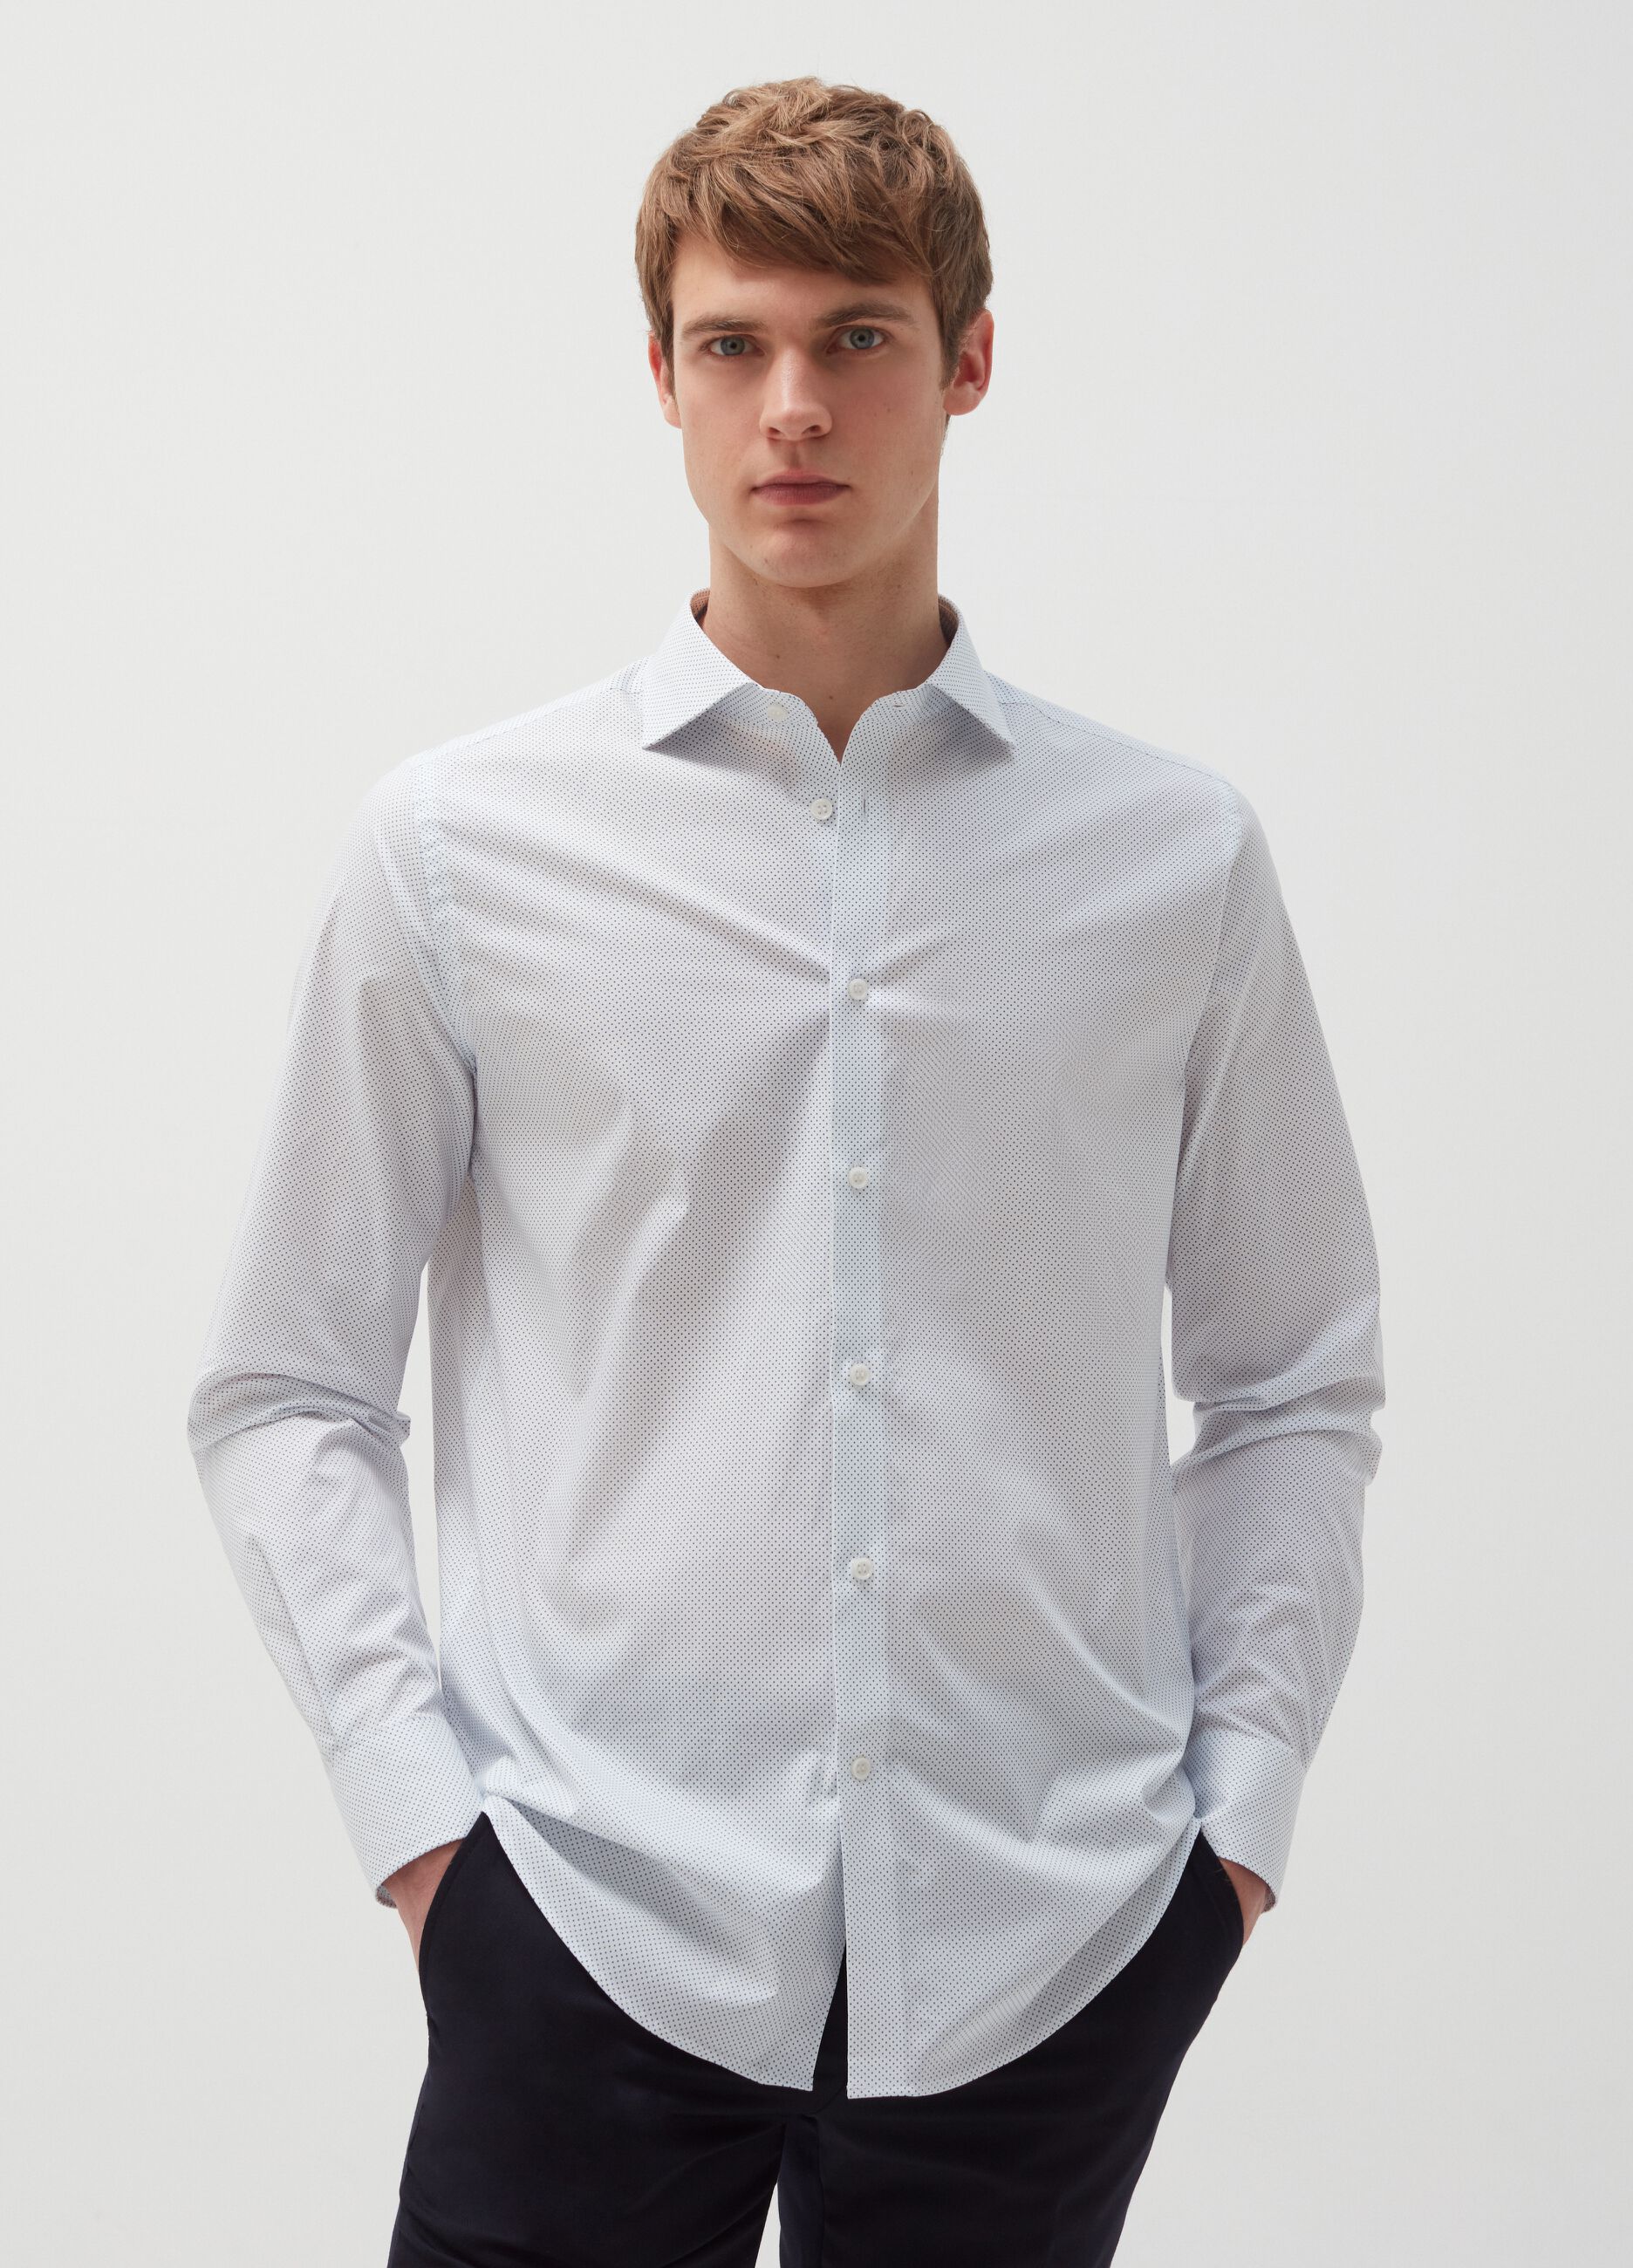 Slim-fit shirt in stretch cotton with mini polka dots